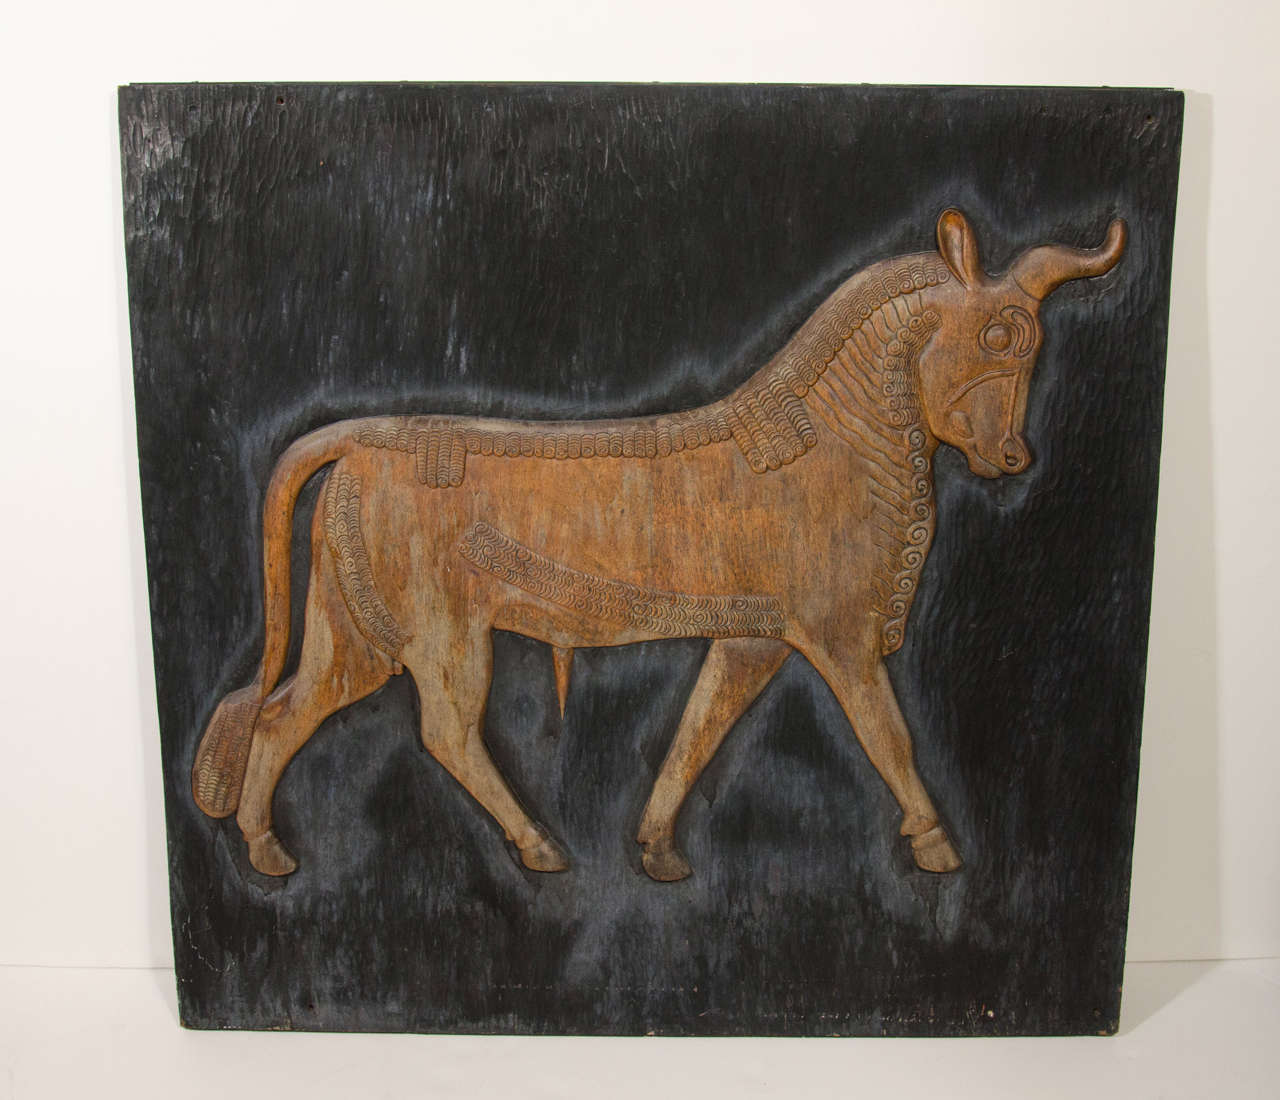 Rare artwork featuring Arabic bull in hand-carved reclaimed wood with exquisite attention to form and detail. Highly stylized engraved bull with decorative carvings over wood panel with hand chiseled grooves throughout. The bull has tones of faded